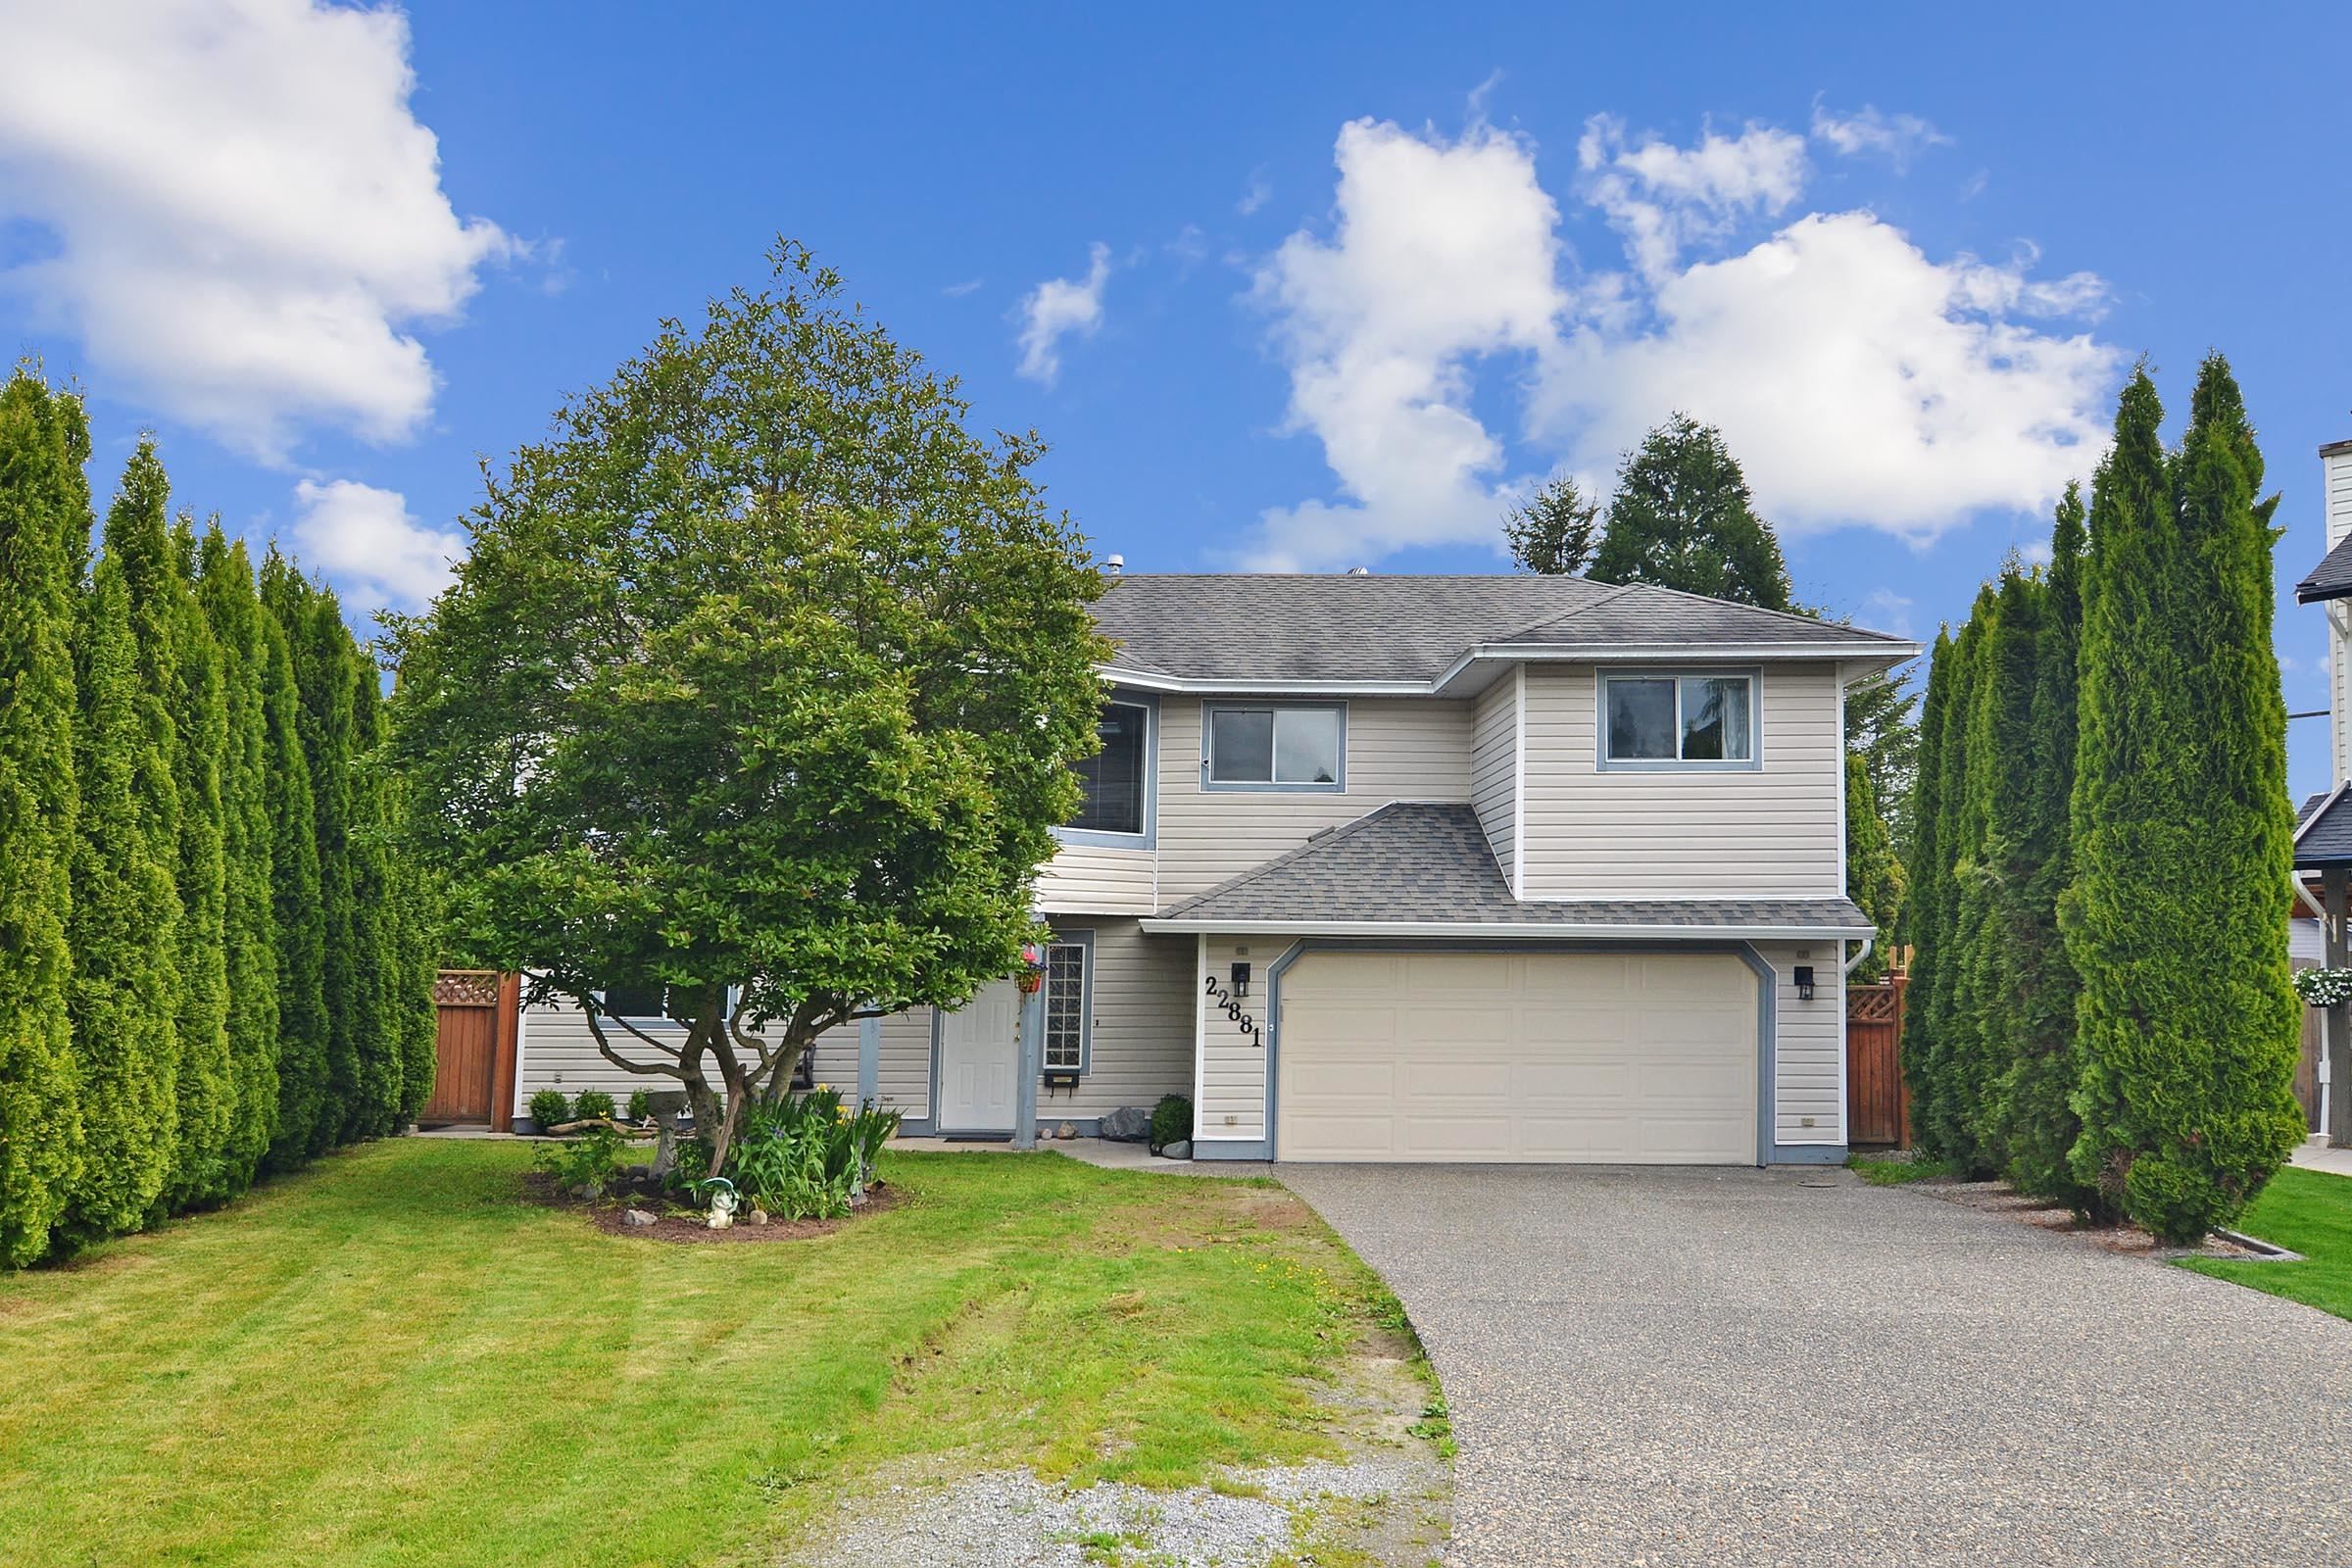 Family home in central Maple Ridge just waiting for you